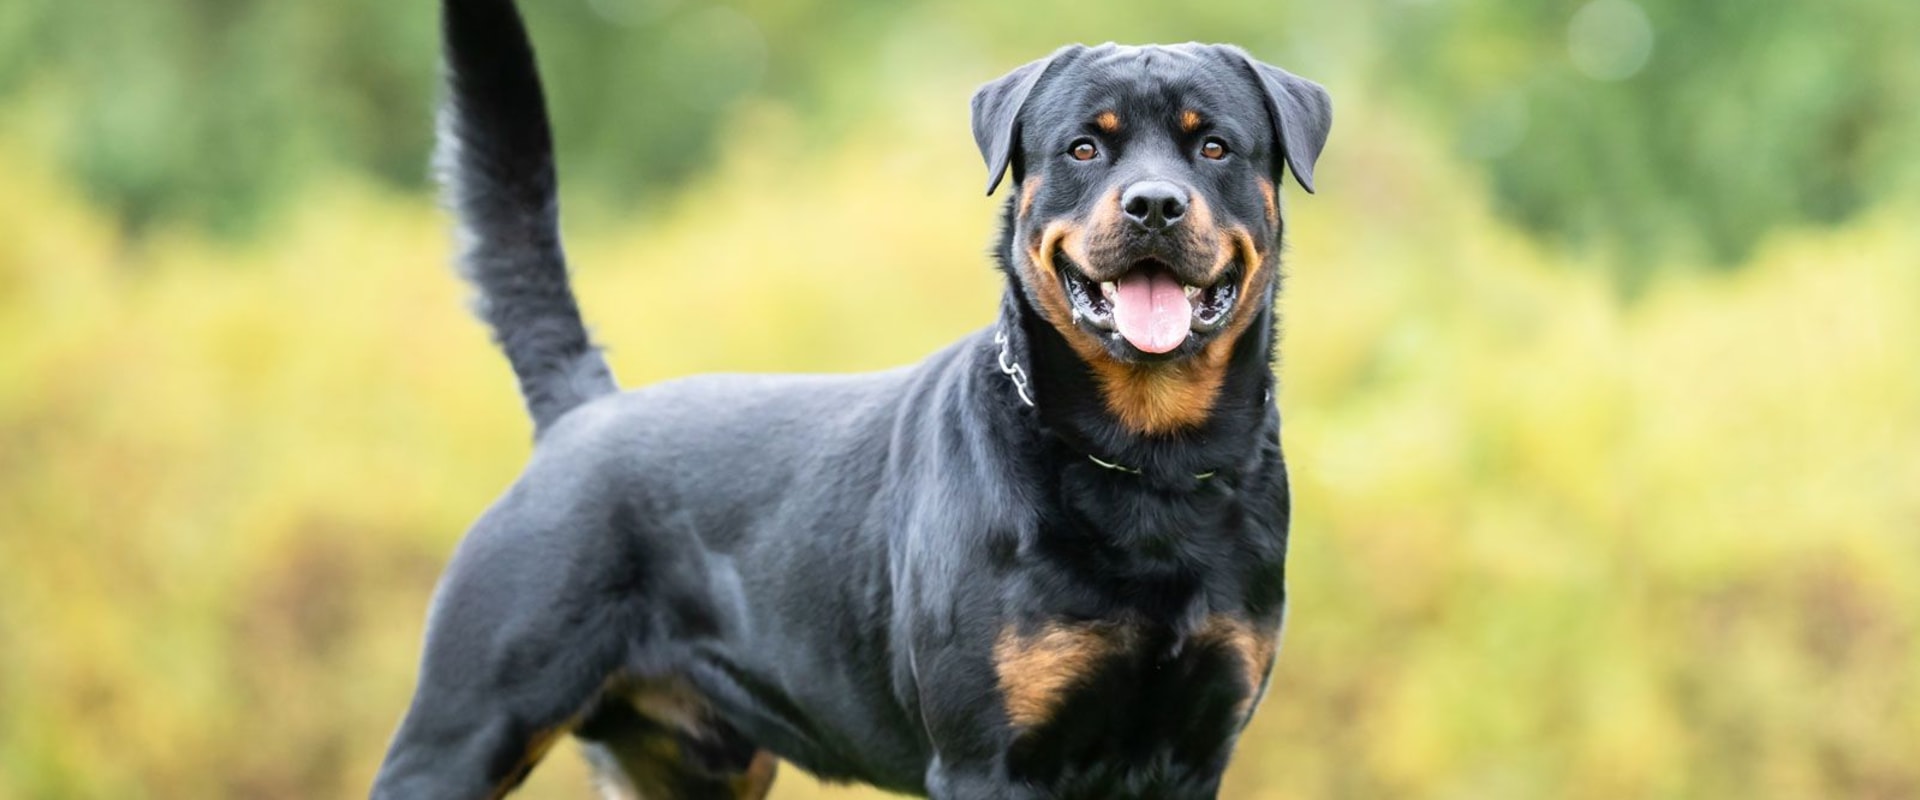 Where rottweilers originate from?